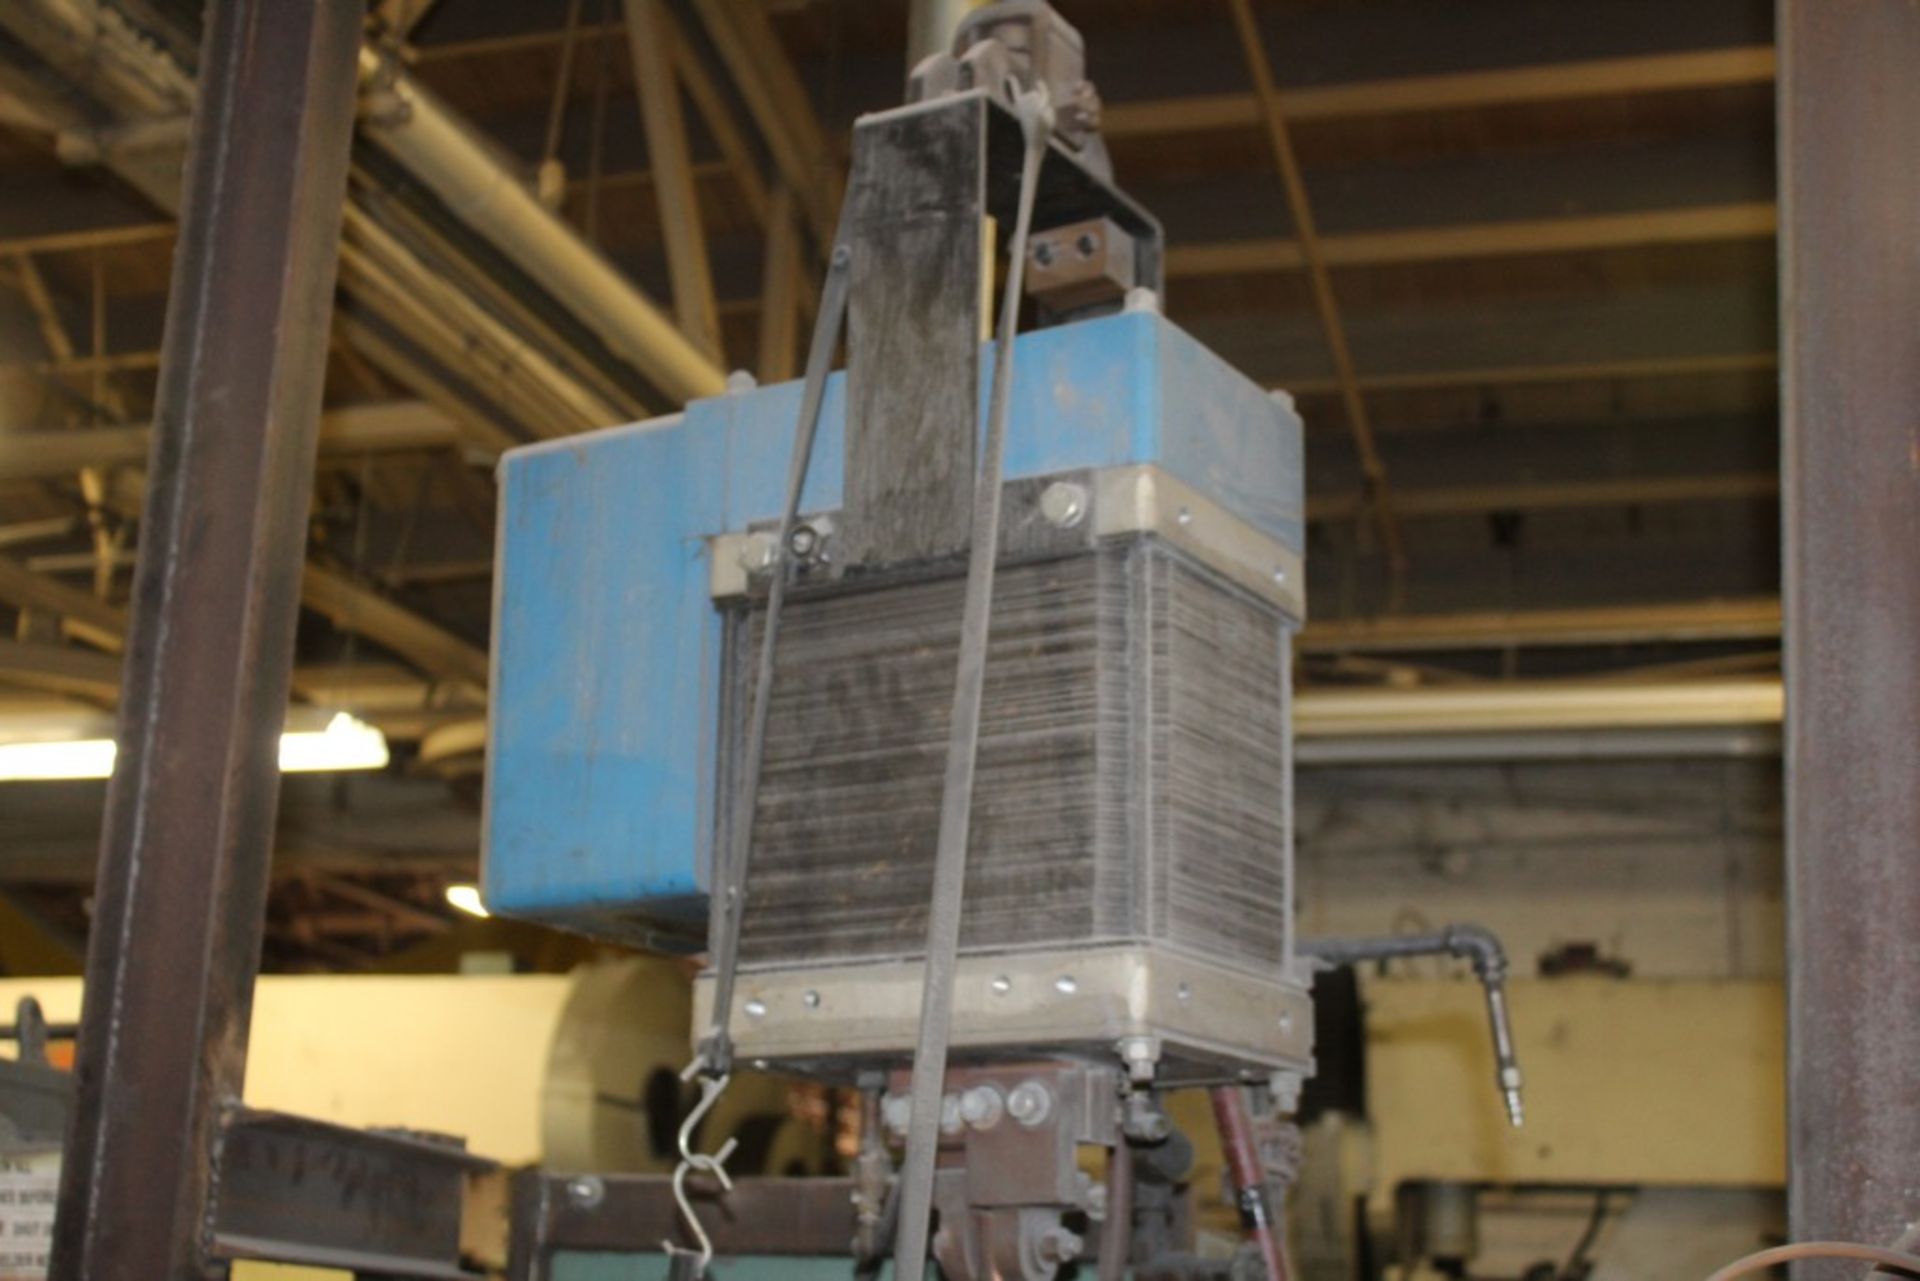 ROBOTRON 75 KVA APPROX. HAND HELD SPOT WELDERS WITH ENTRON CONTROL Loading Fee: $300 - Image 5 of 8